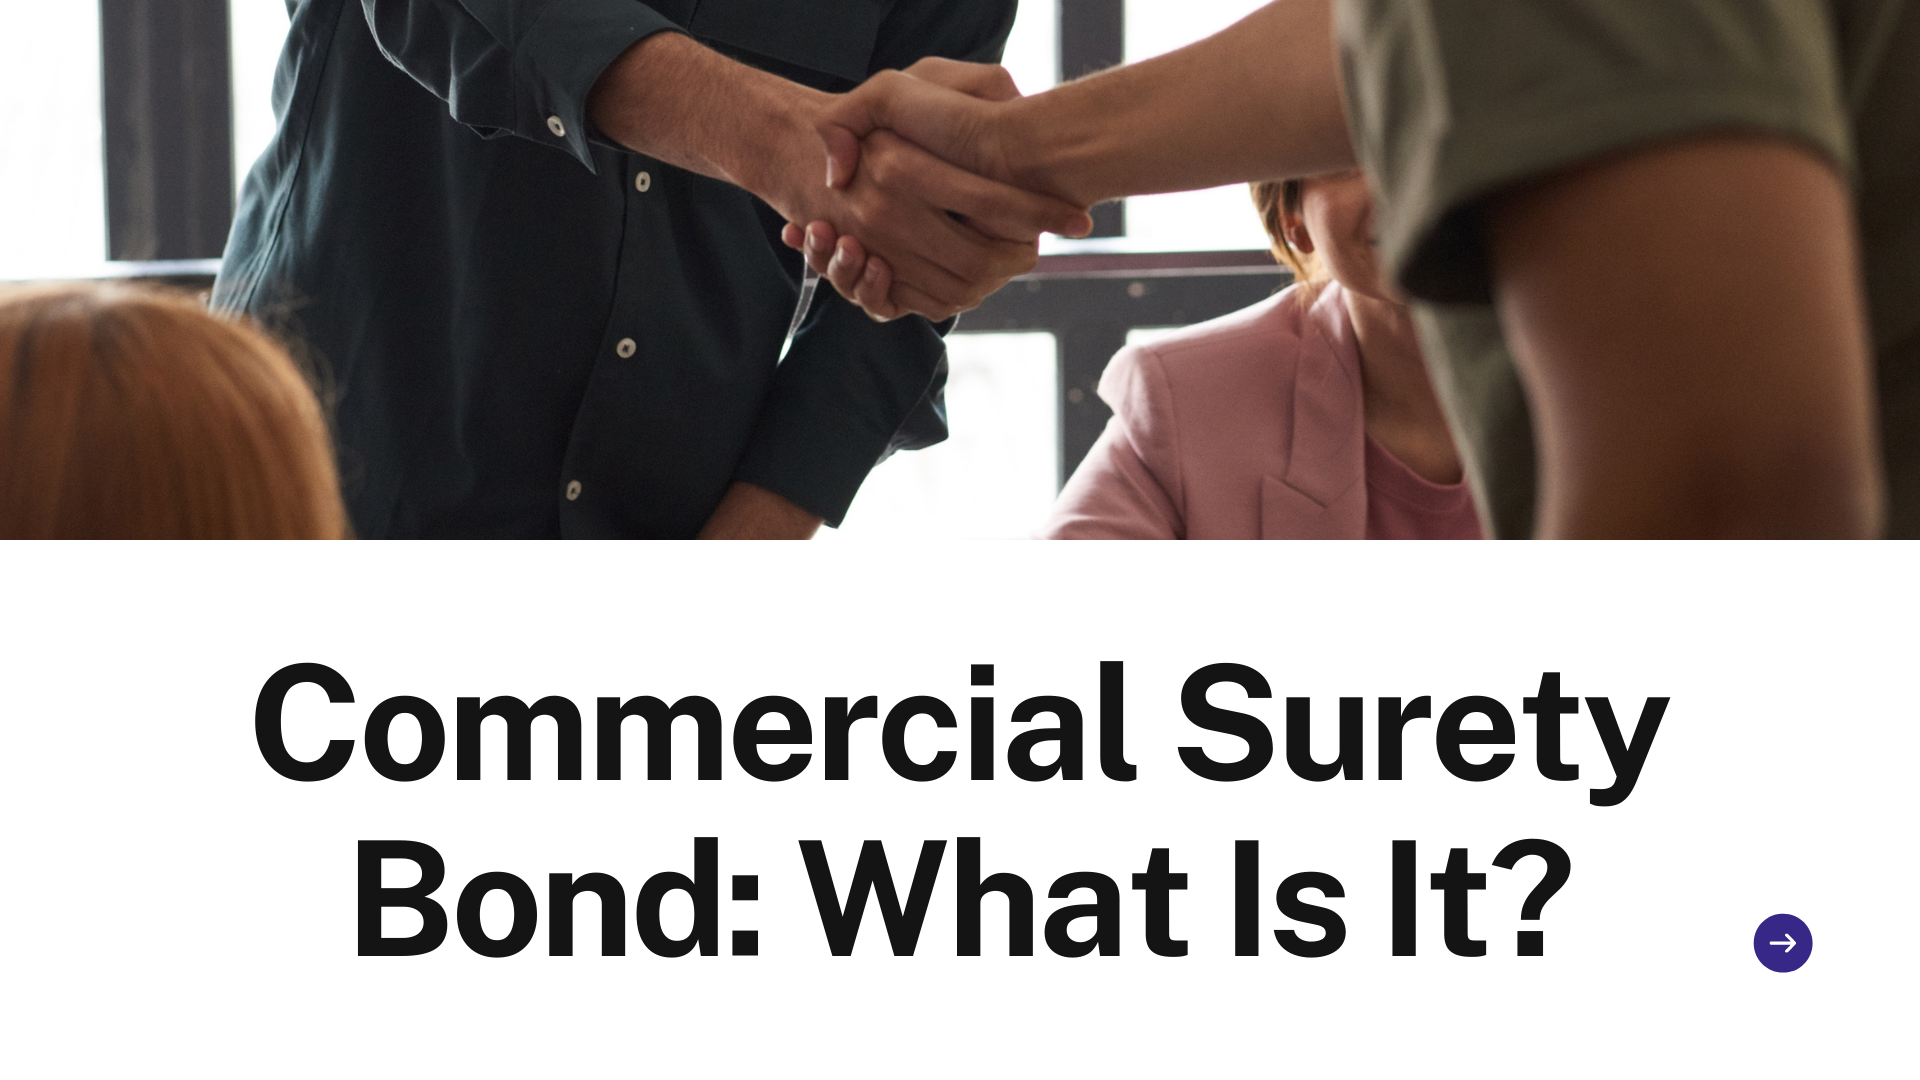 surety bond - What is a commercial surety bond